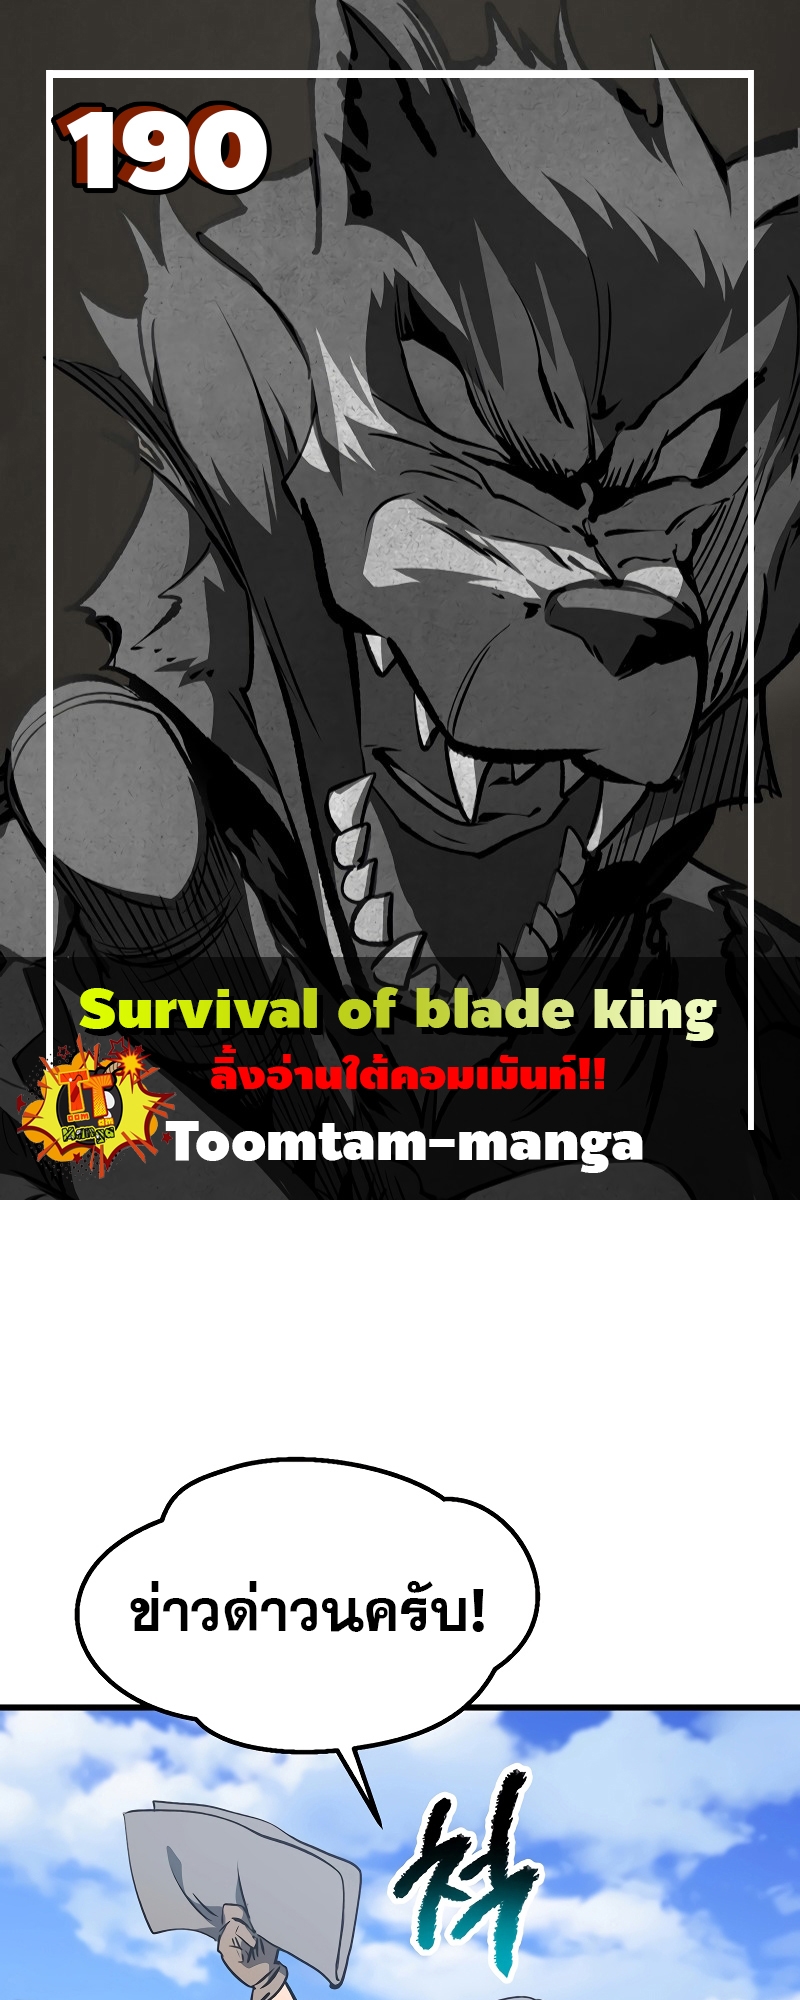 Survival of blade king 190 3 2 25670001